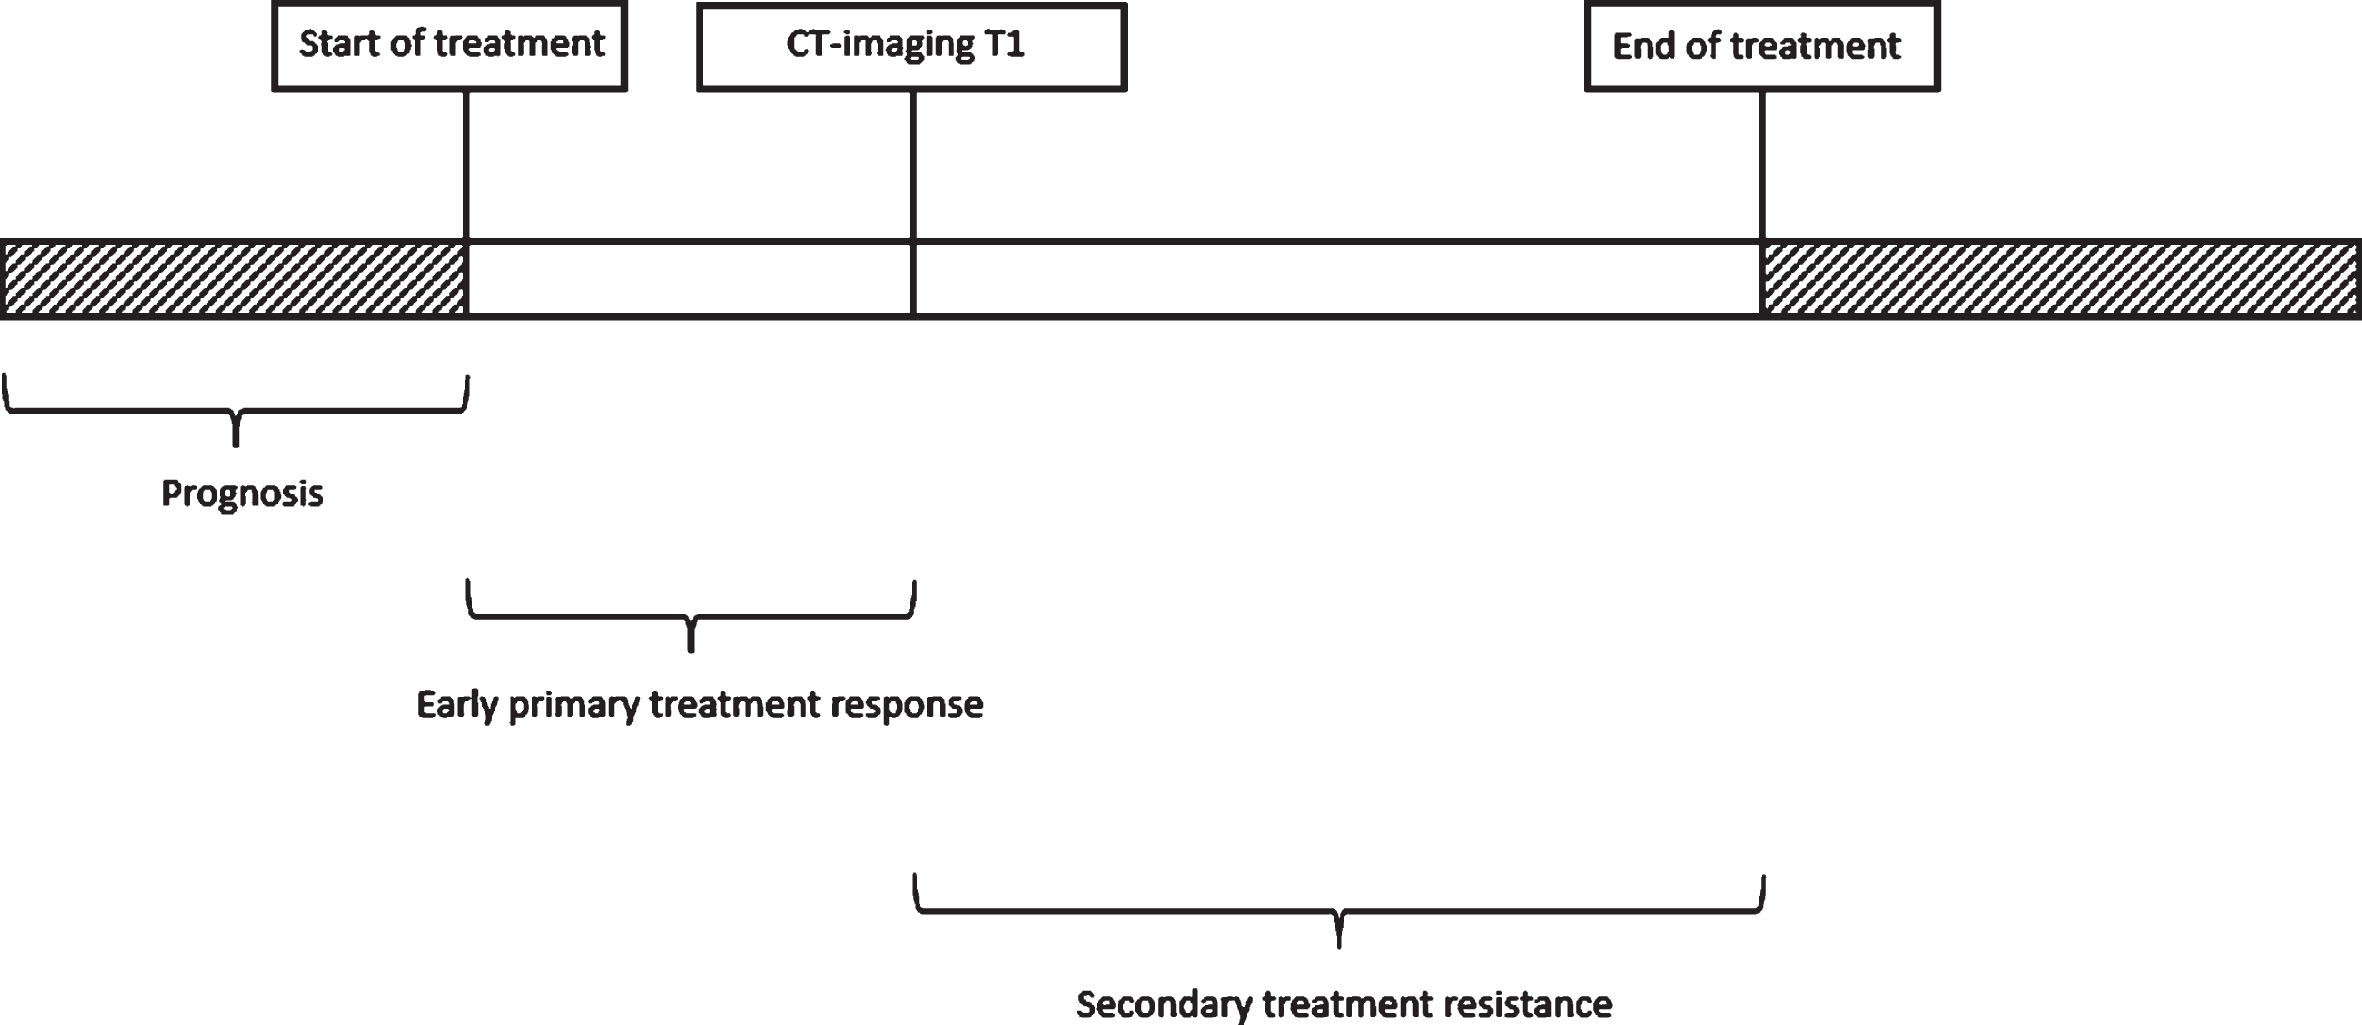 Timeline illustrating the definitions of prediction of (a) prognosis, (b) early primary treatment response, and (c) secondary treatment resistance.